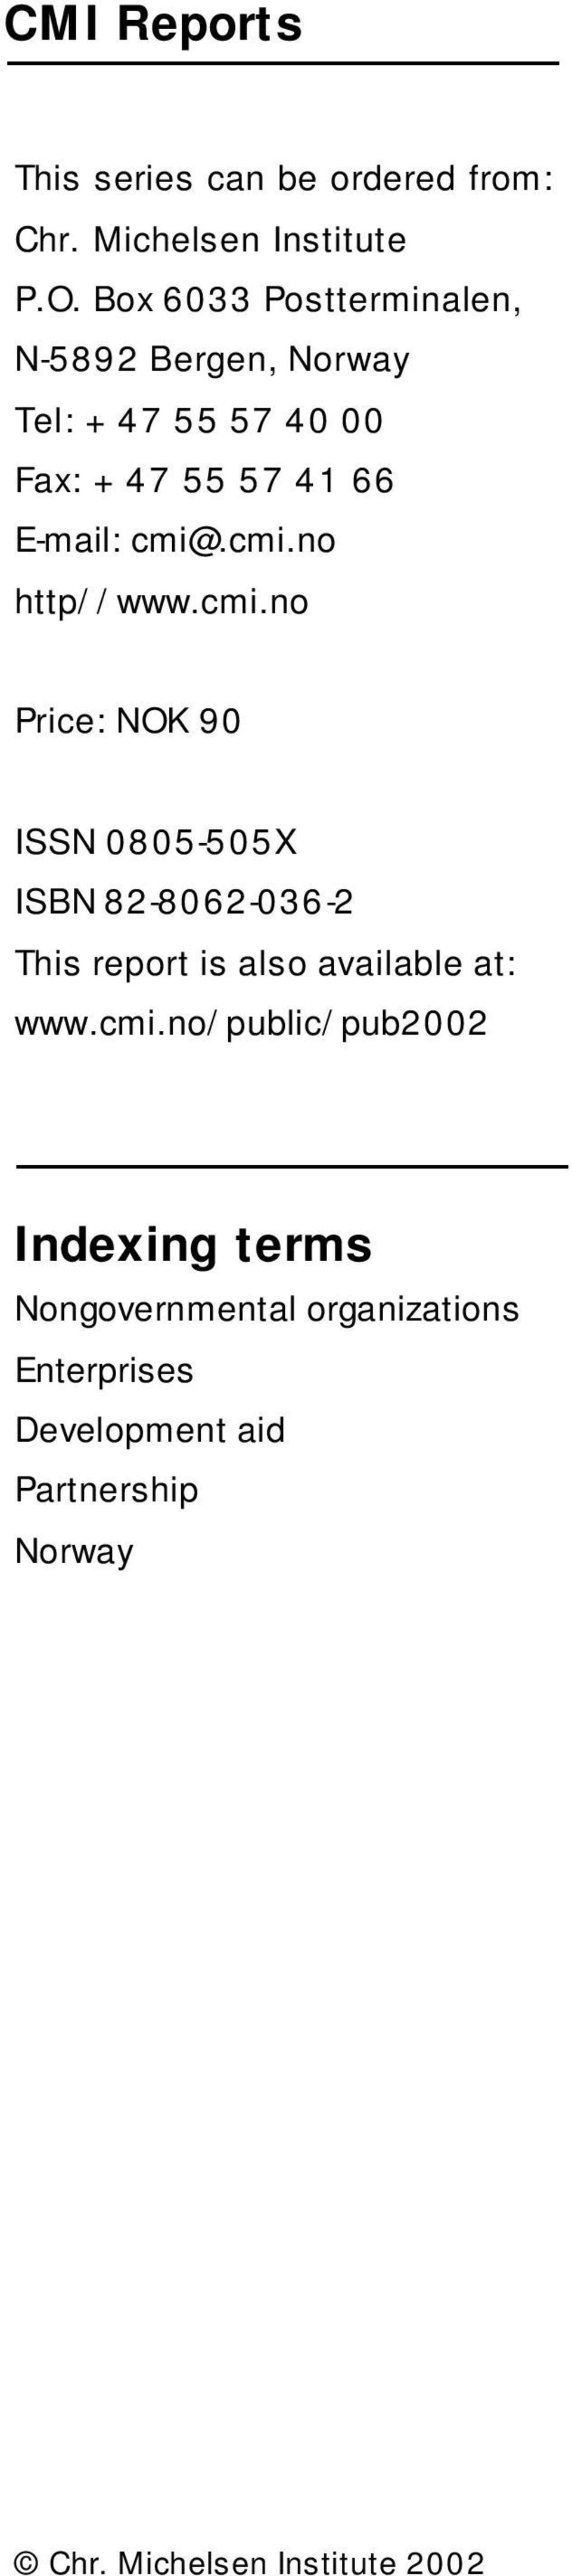 cmi.no http//www.cmi.no Price: NOK 90 ISSN 0805-505X ISBN 82-8062-036-2 This report is also available at: www.